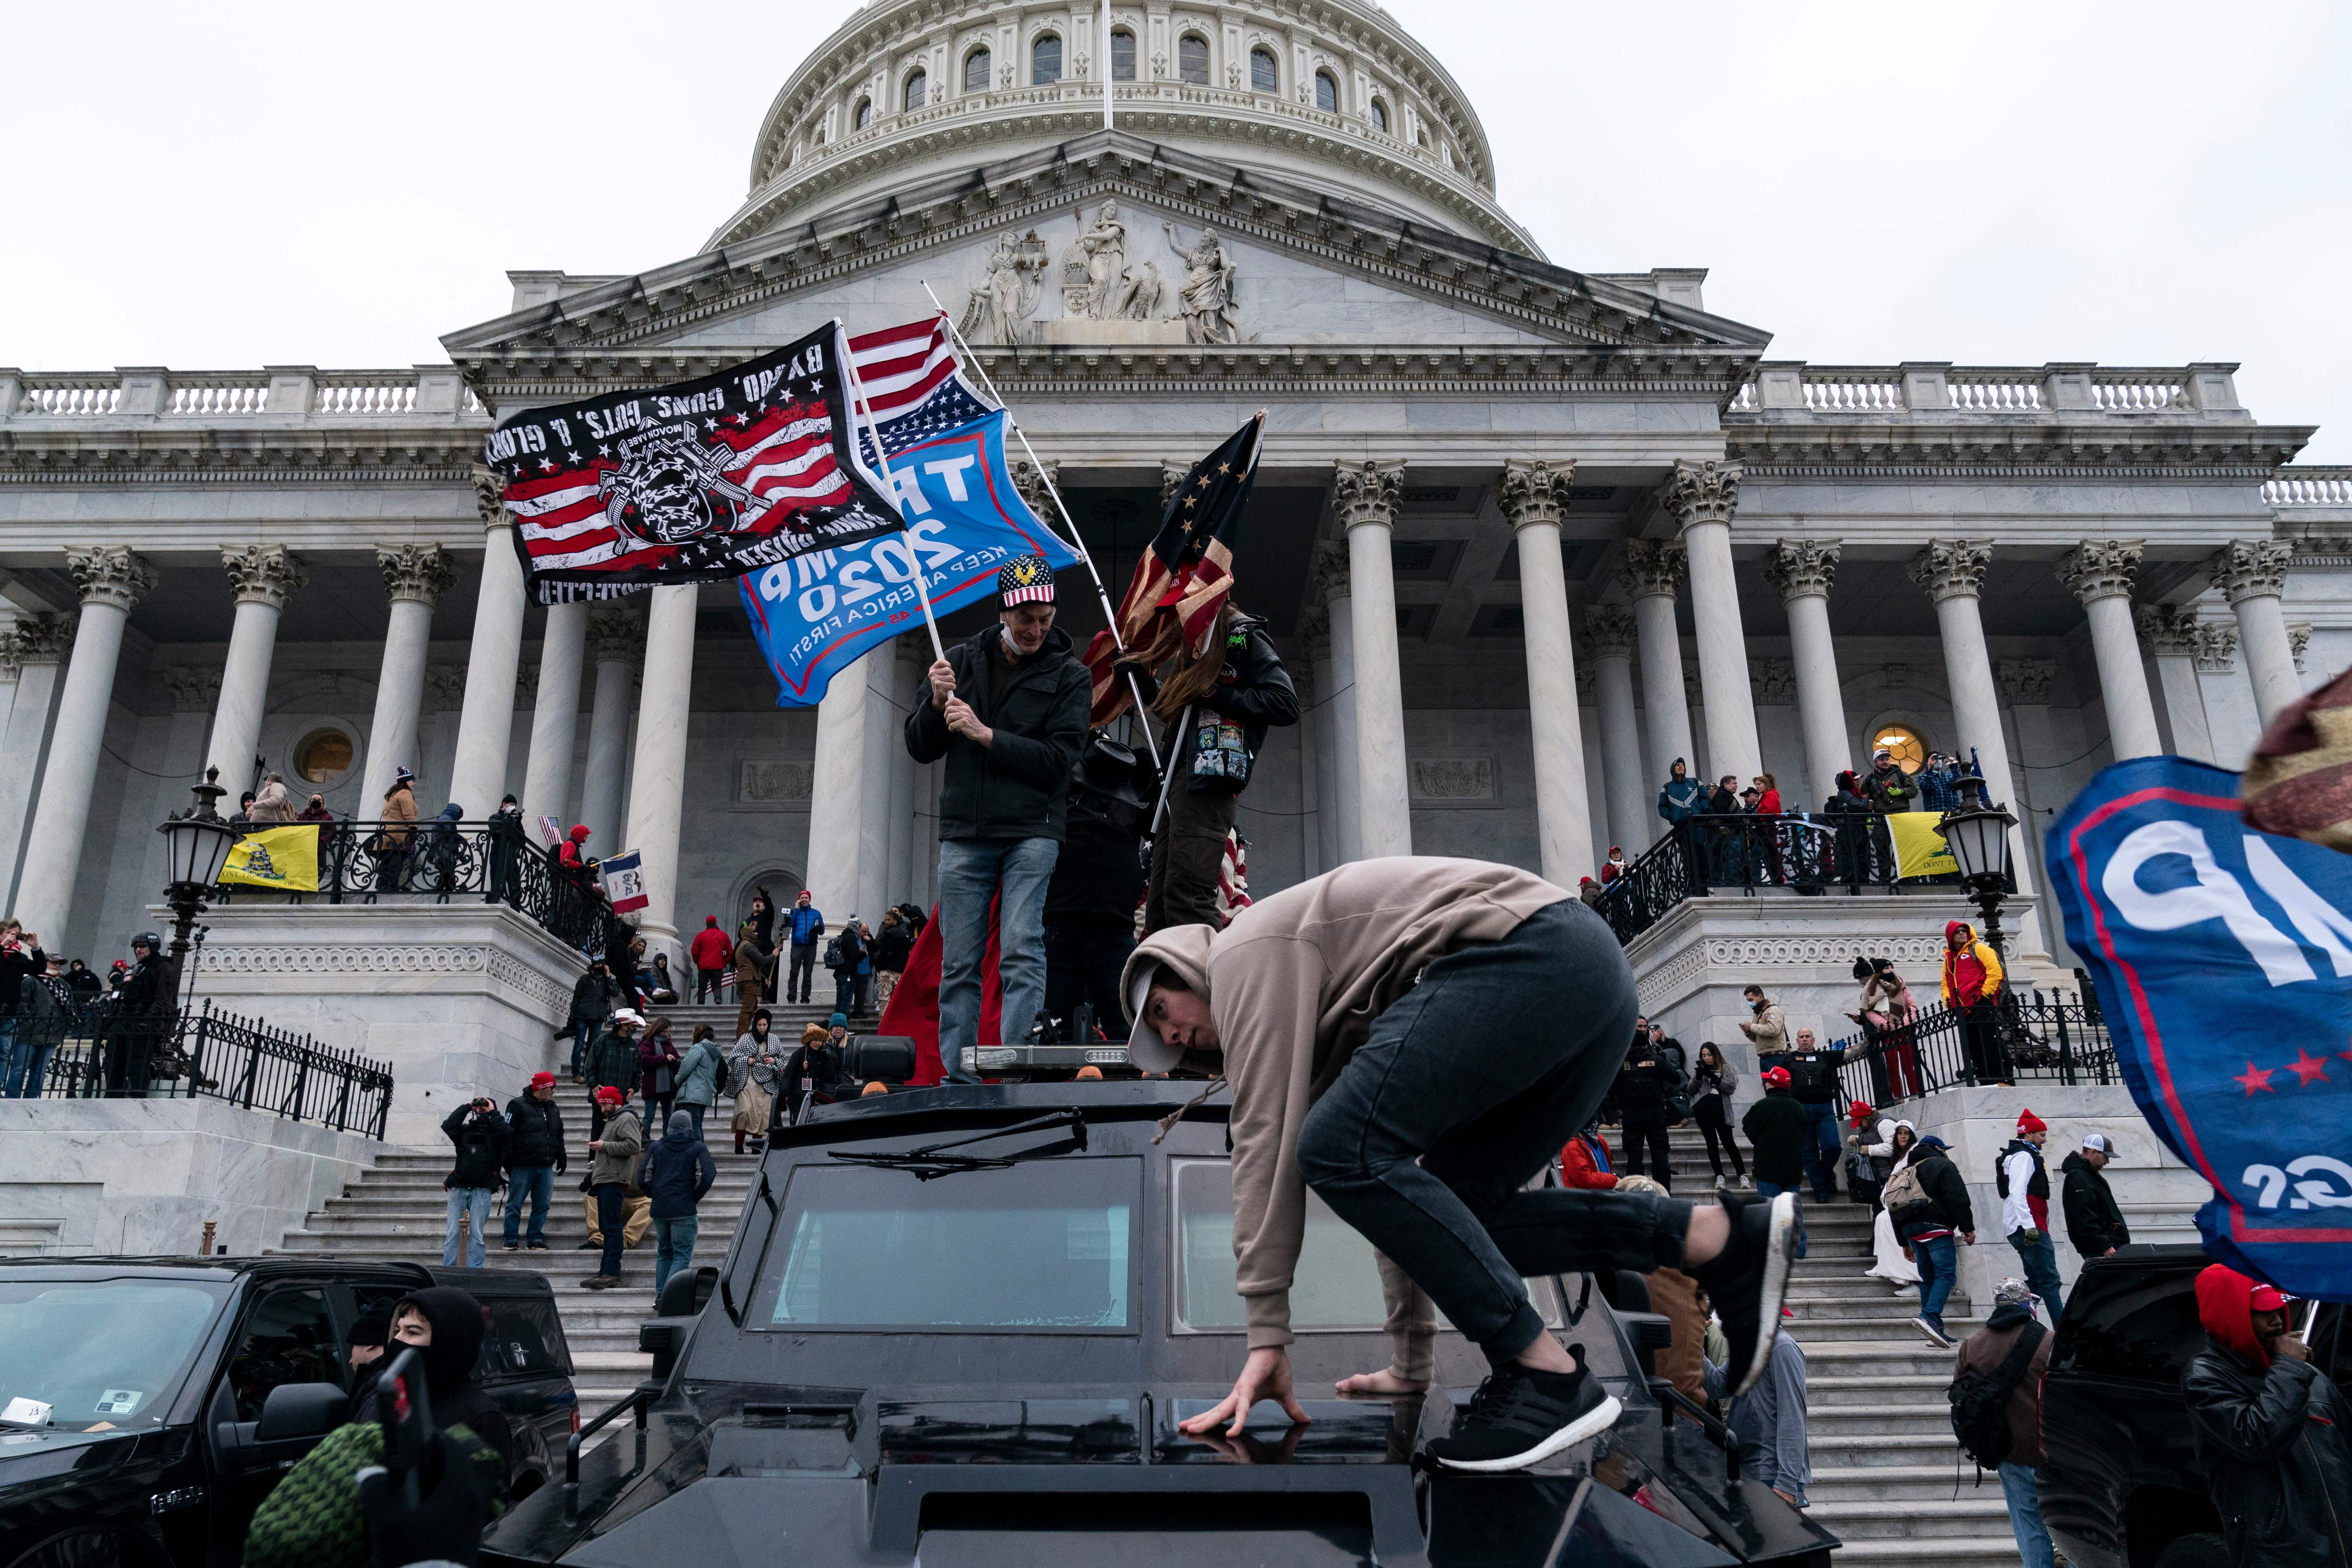 A man jumps on a vehicle in front of the Capitol. Others stand on top of it, waving large "Trump 2020" flags. More protesters are massed on the Capitol steps.